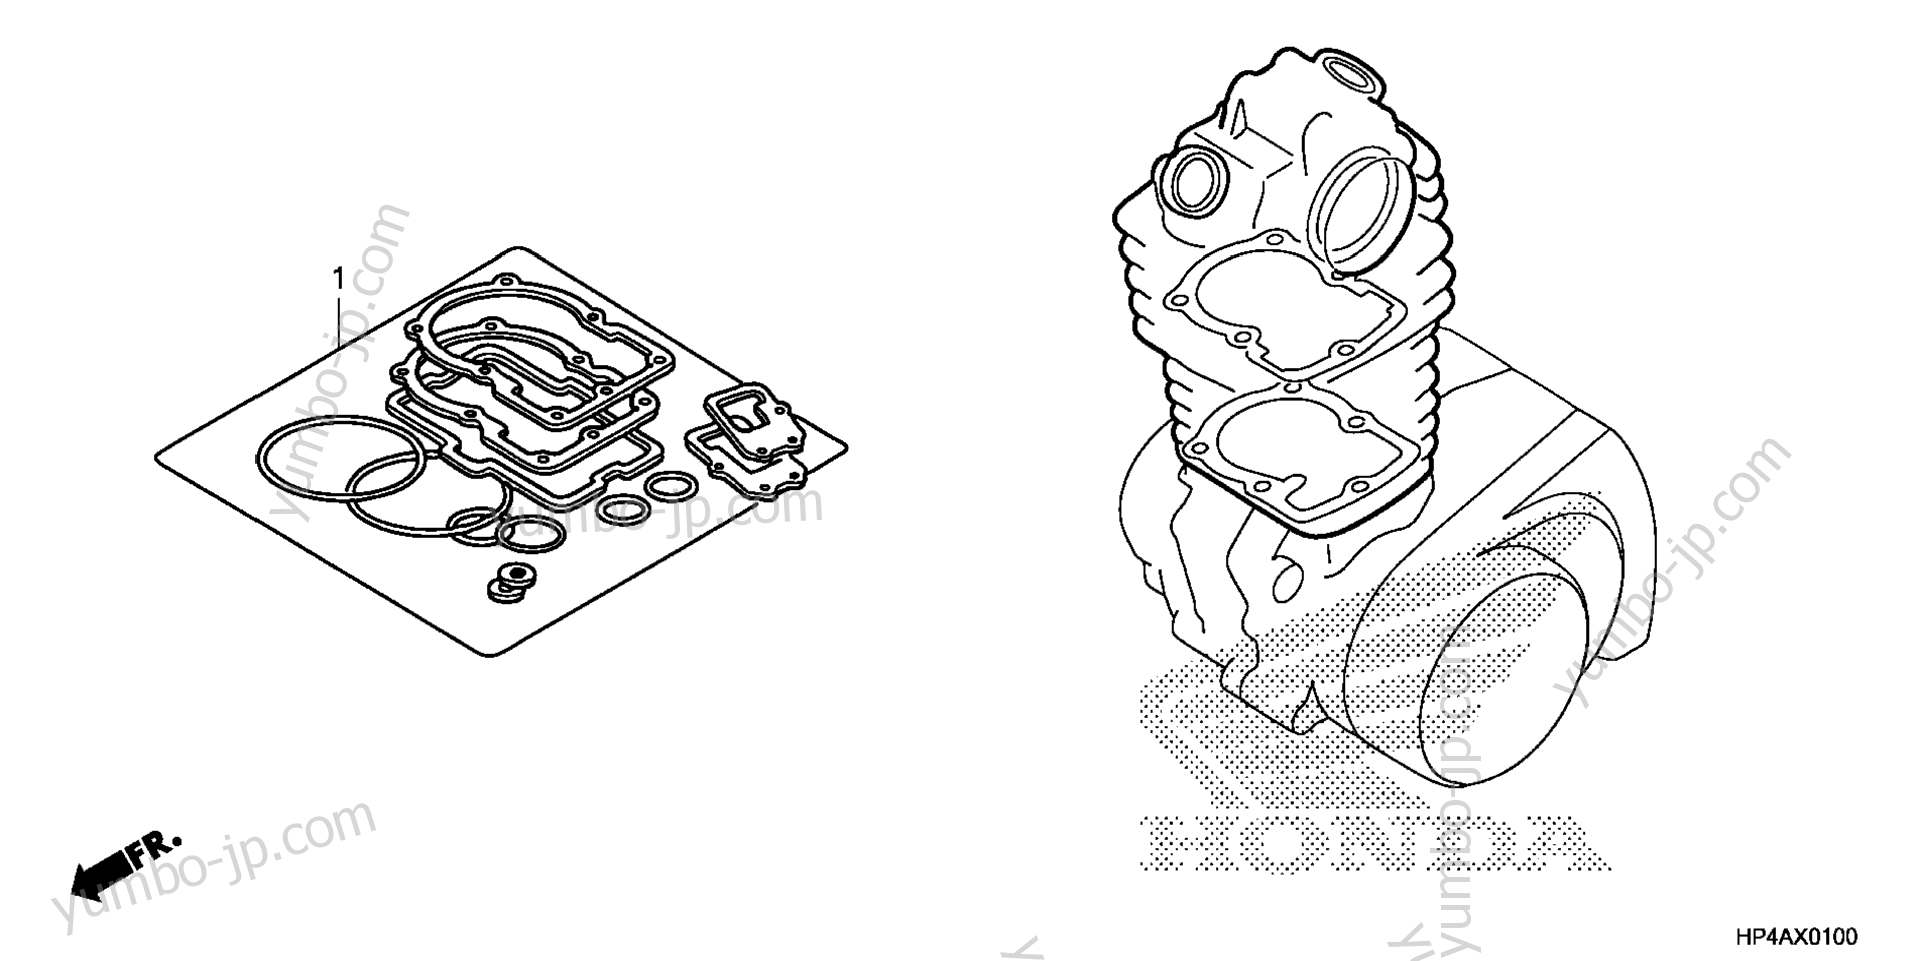 GASKET KIT A for ATVs HONDA TRX420FPM A 2010 year